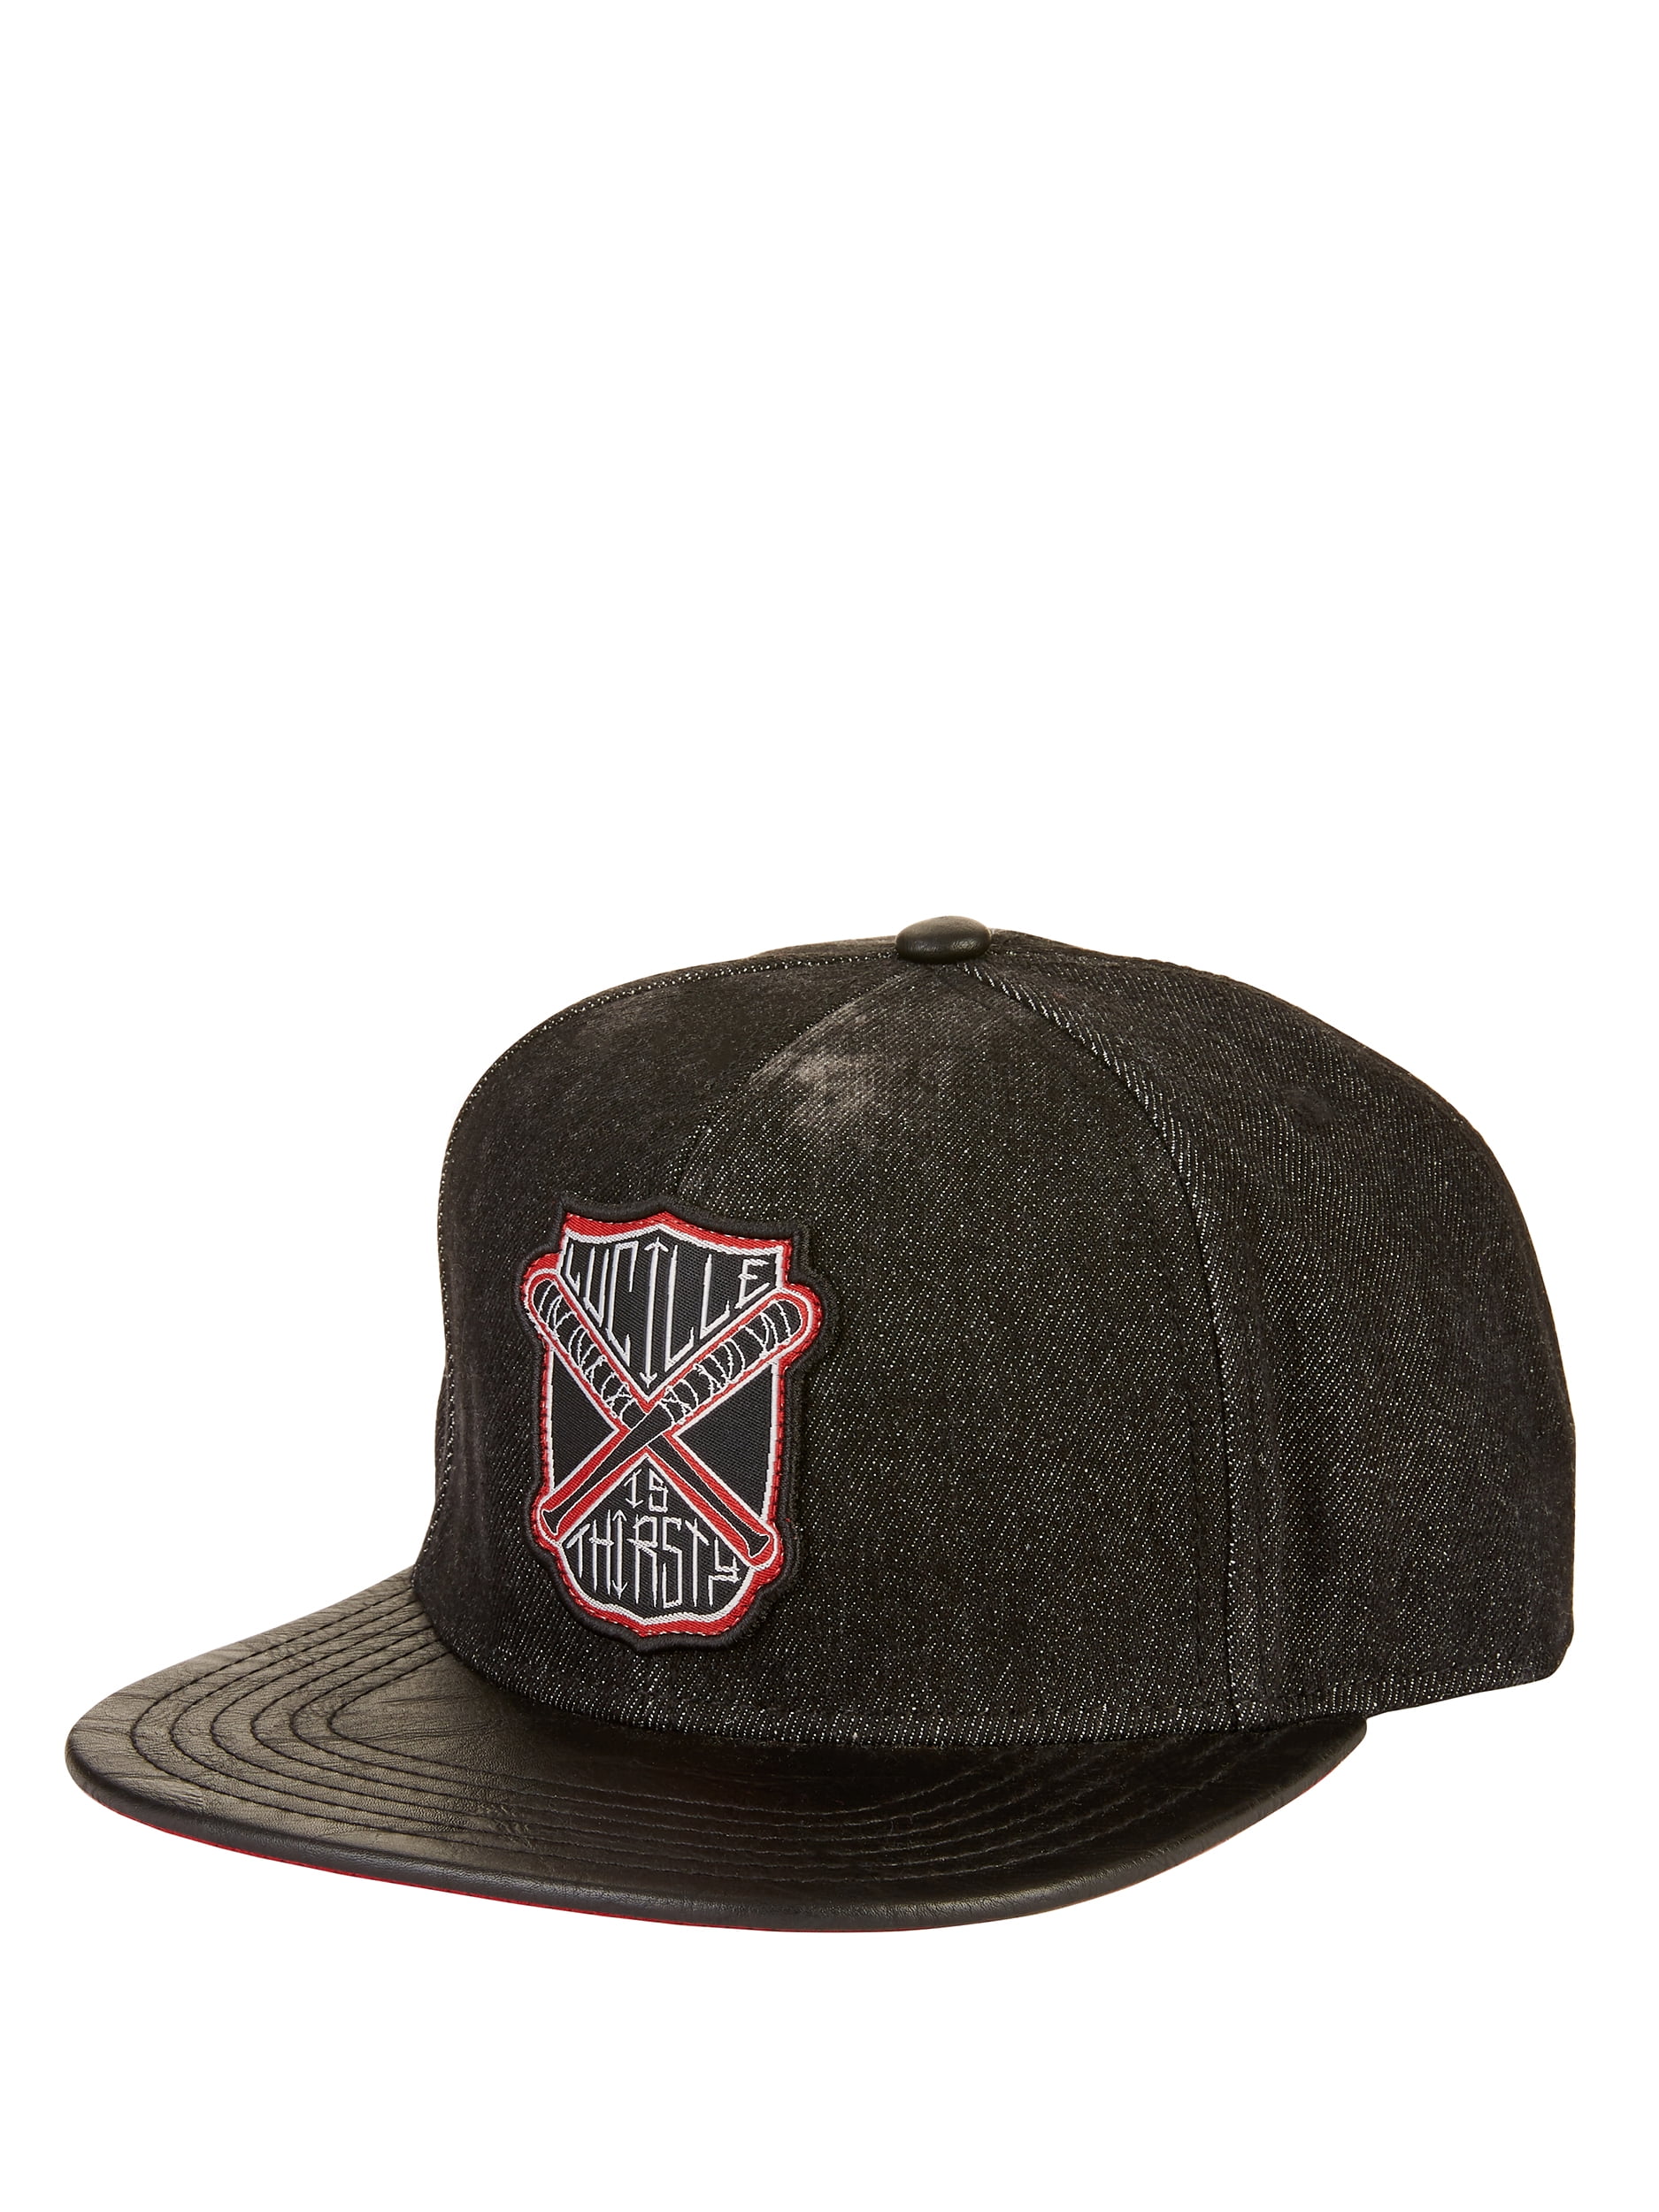 AMC's The Walking Dead Denim Snapback Cap with Lucille Patch and Faux ...